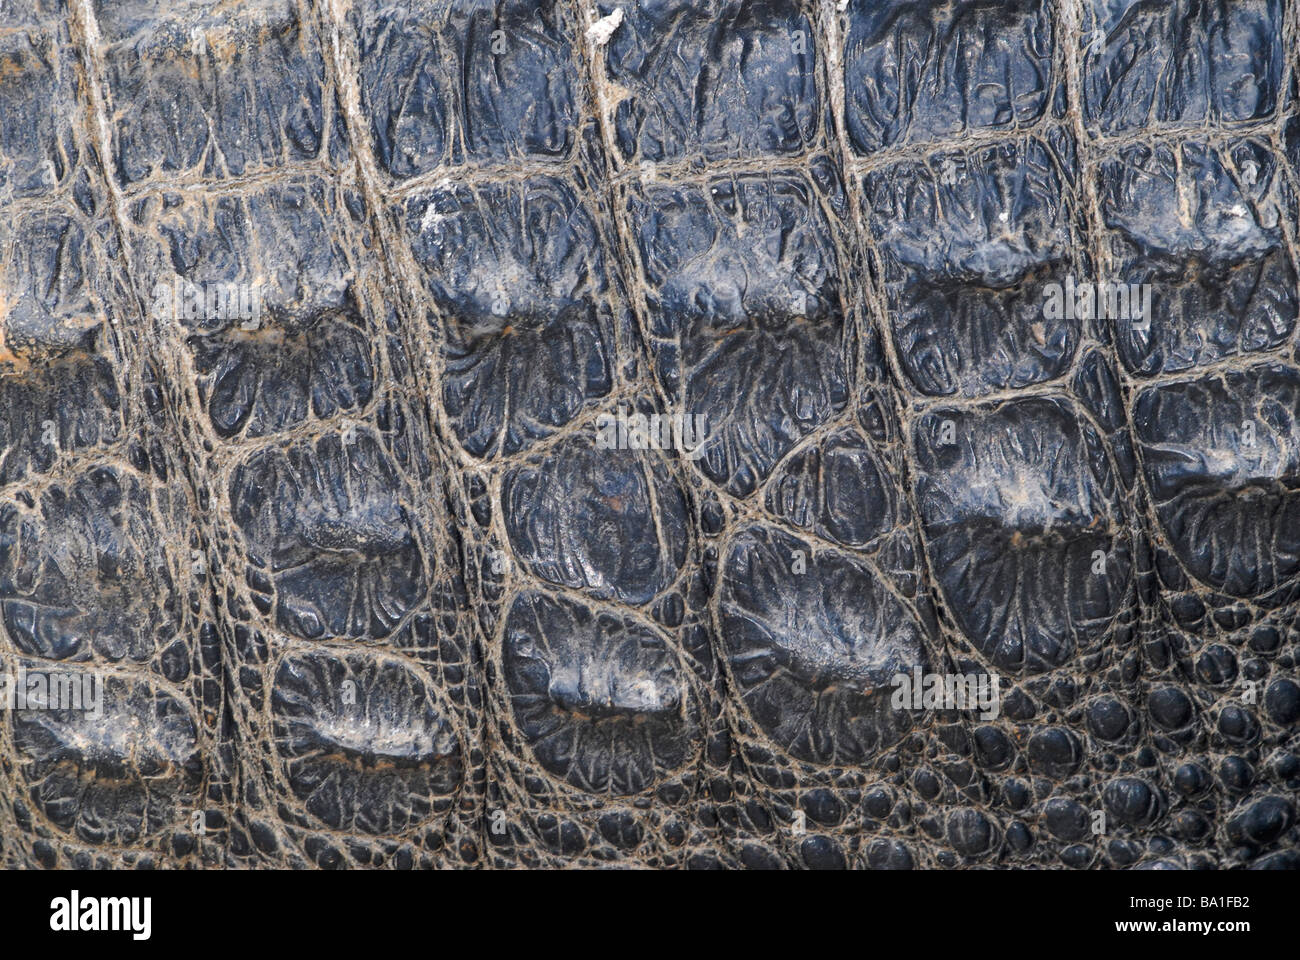 A close up photo of the skin of an American alligator (Alligator mississippiensis). Stock Photo